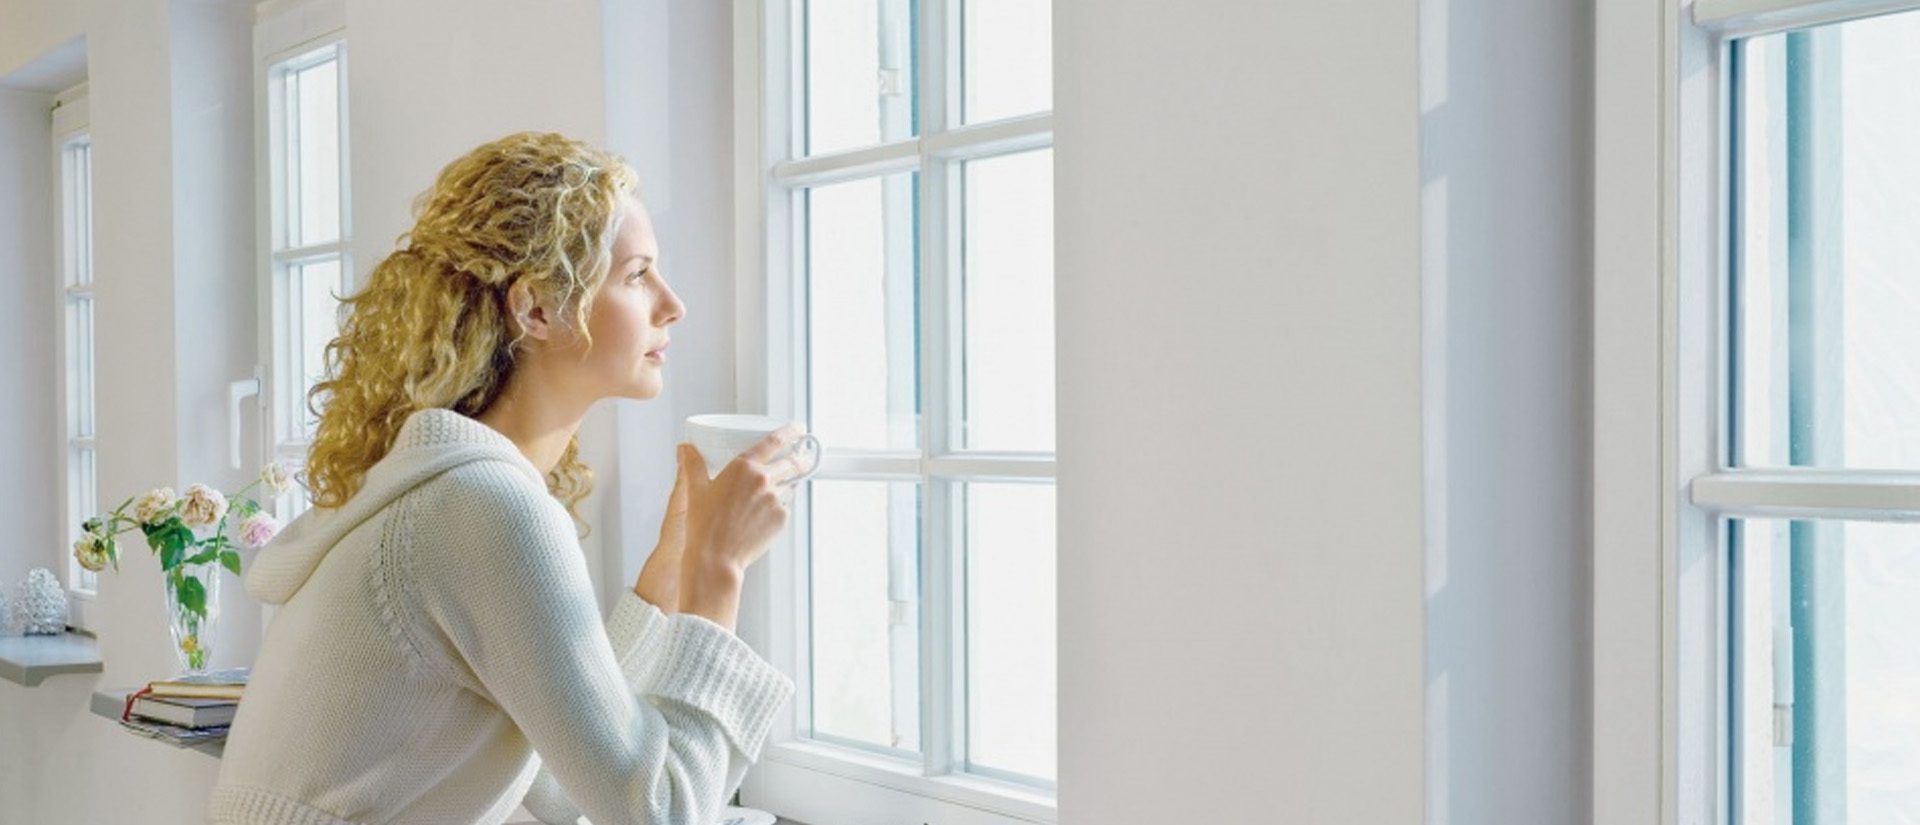 a woman looking outside the window with a cup of coffee in her hand, enjoying fresh indoor environment.